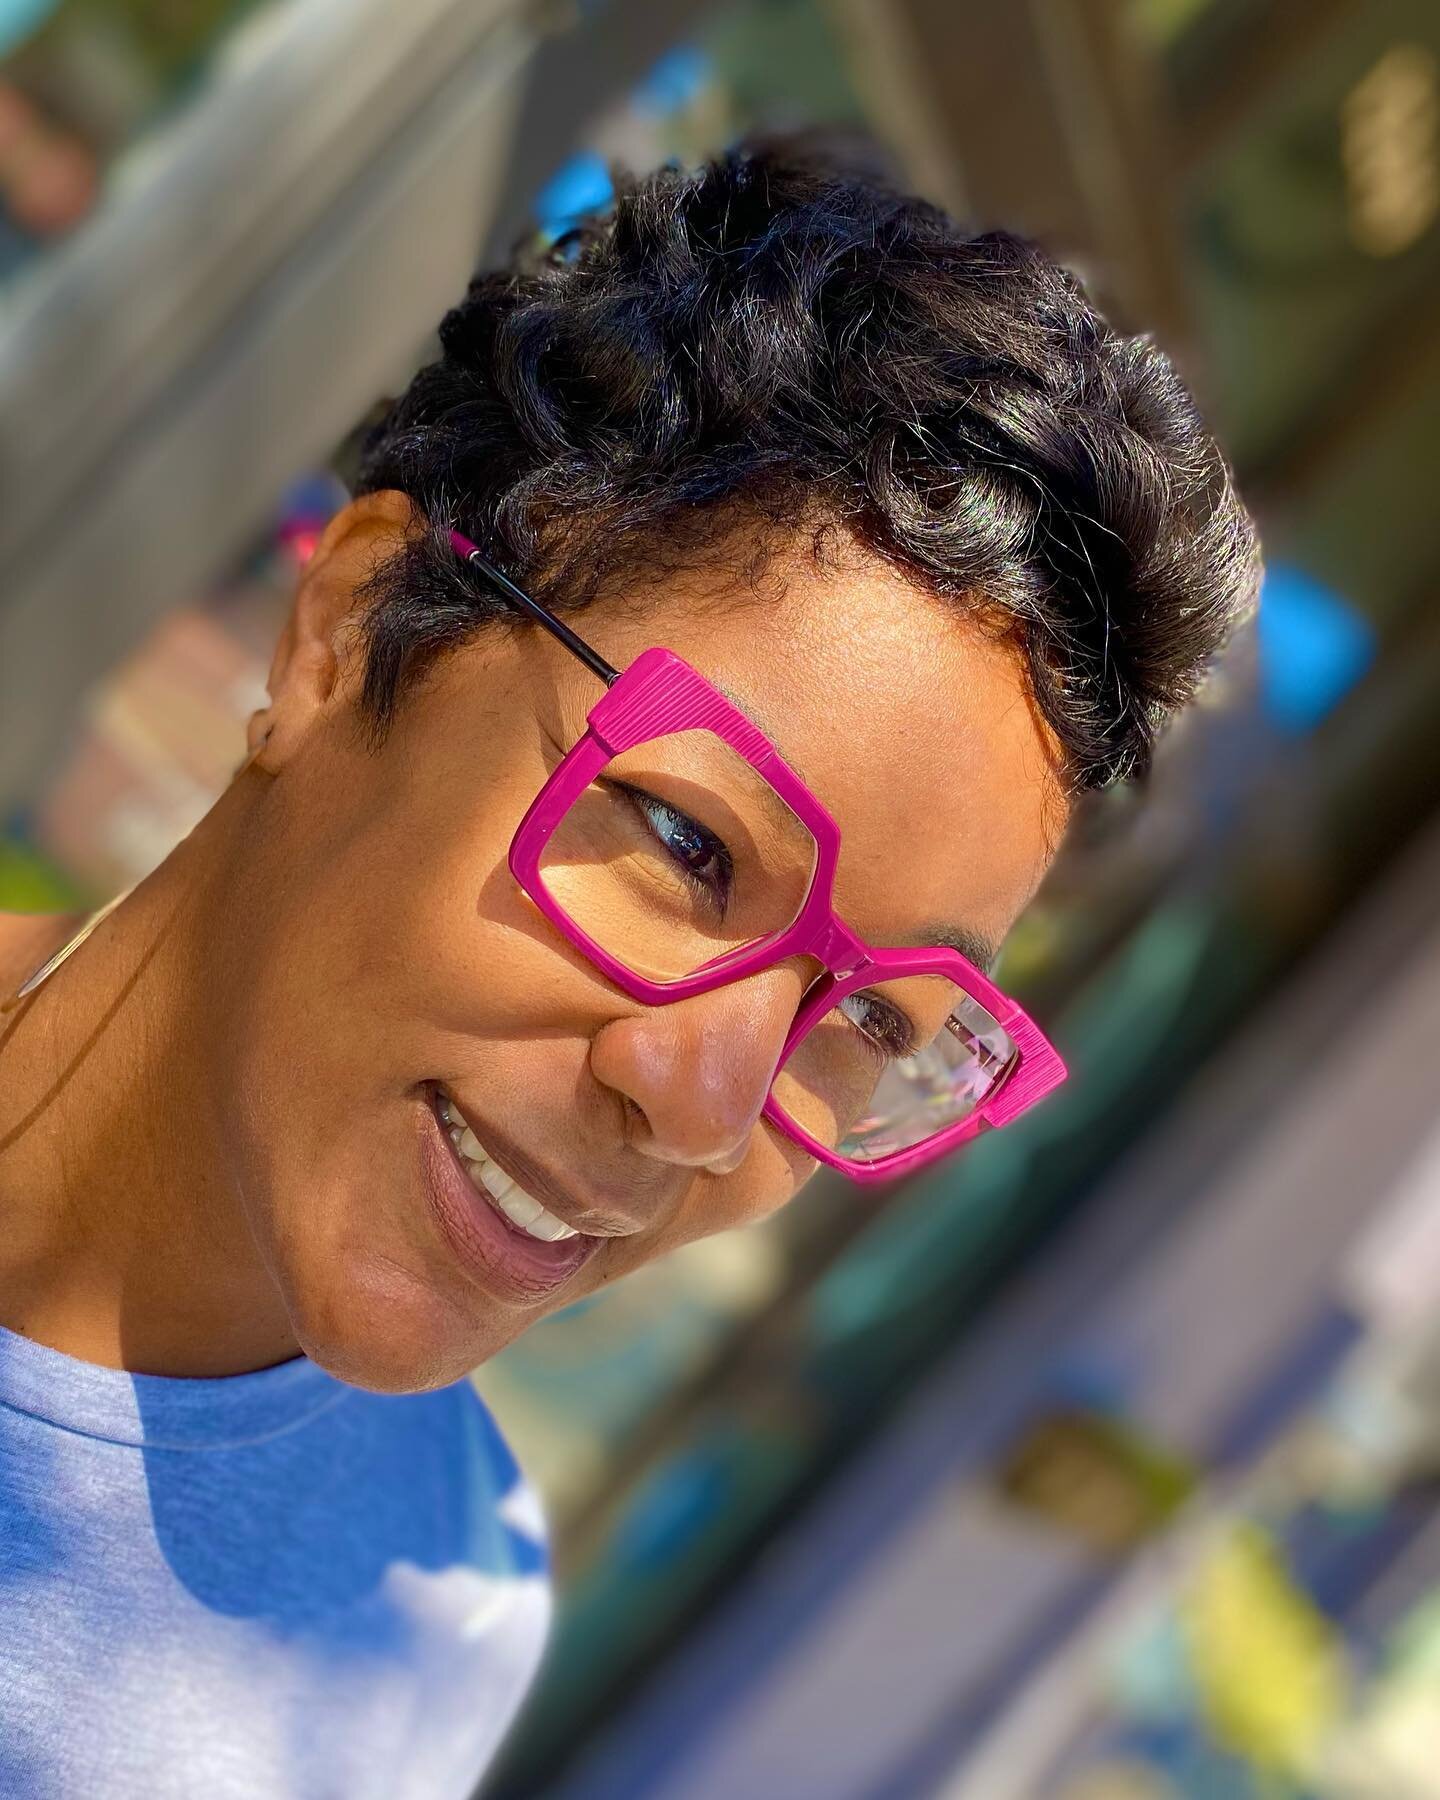 💓💓💓 look at this beauty!! Our lovely patient is rocking @fusion_eyewear &amp; killing it! 
.
.
.
#DesignerEyewear #EuropeanGlasses #Handmade #Quality #UniqueGlasses #TheUniqueOpticalExperience #SodaCityEyeDoctor #SodaCity #DoctorsofSC